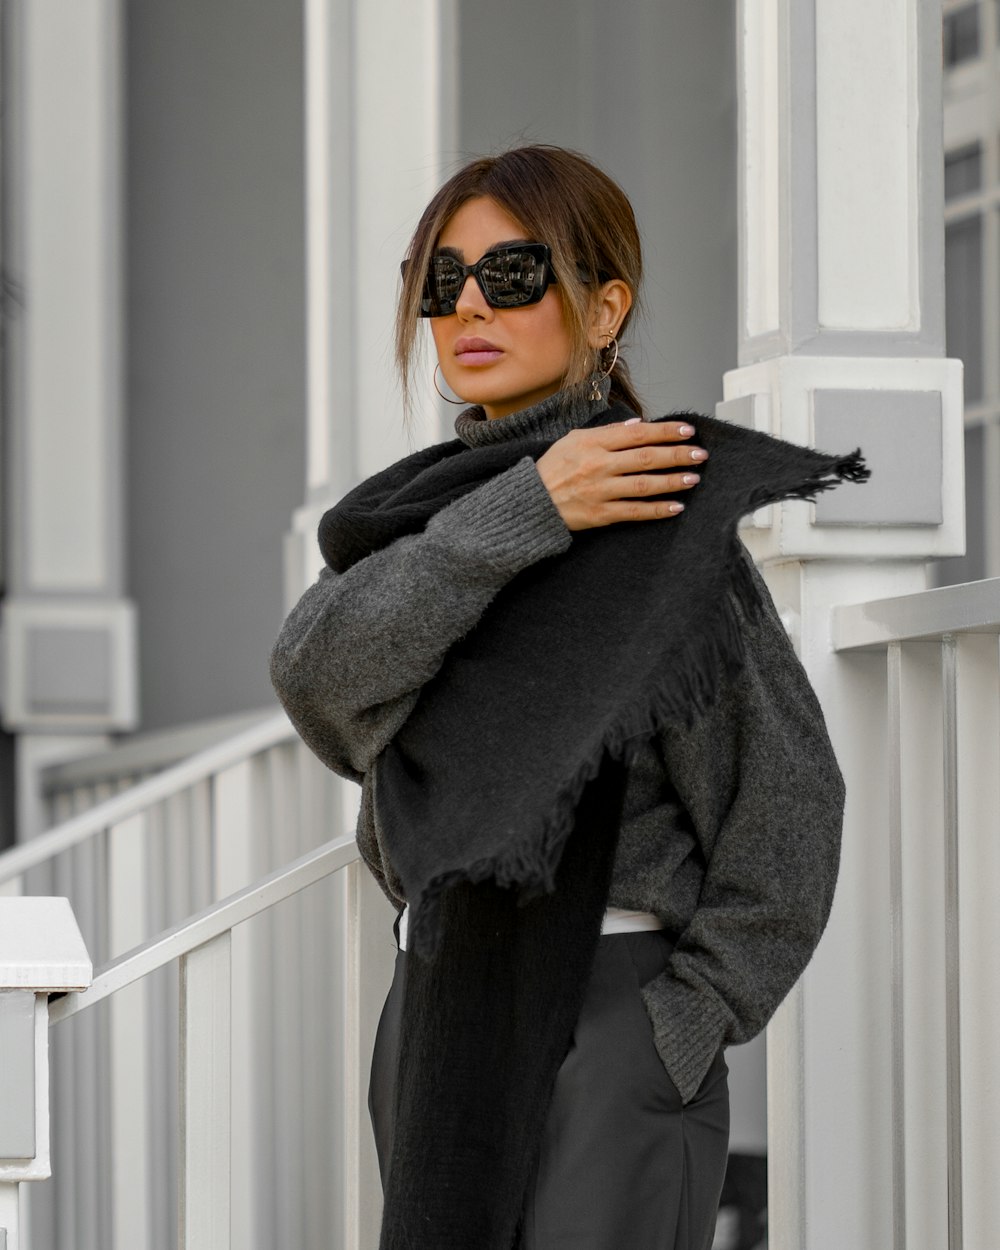 a woman wearing sunglasses and a black scarf